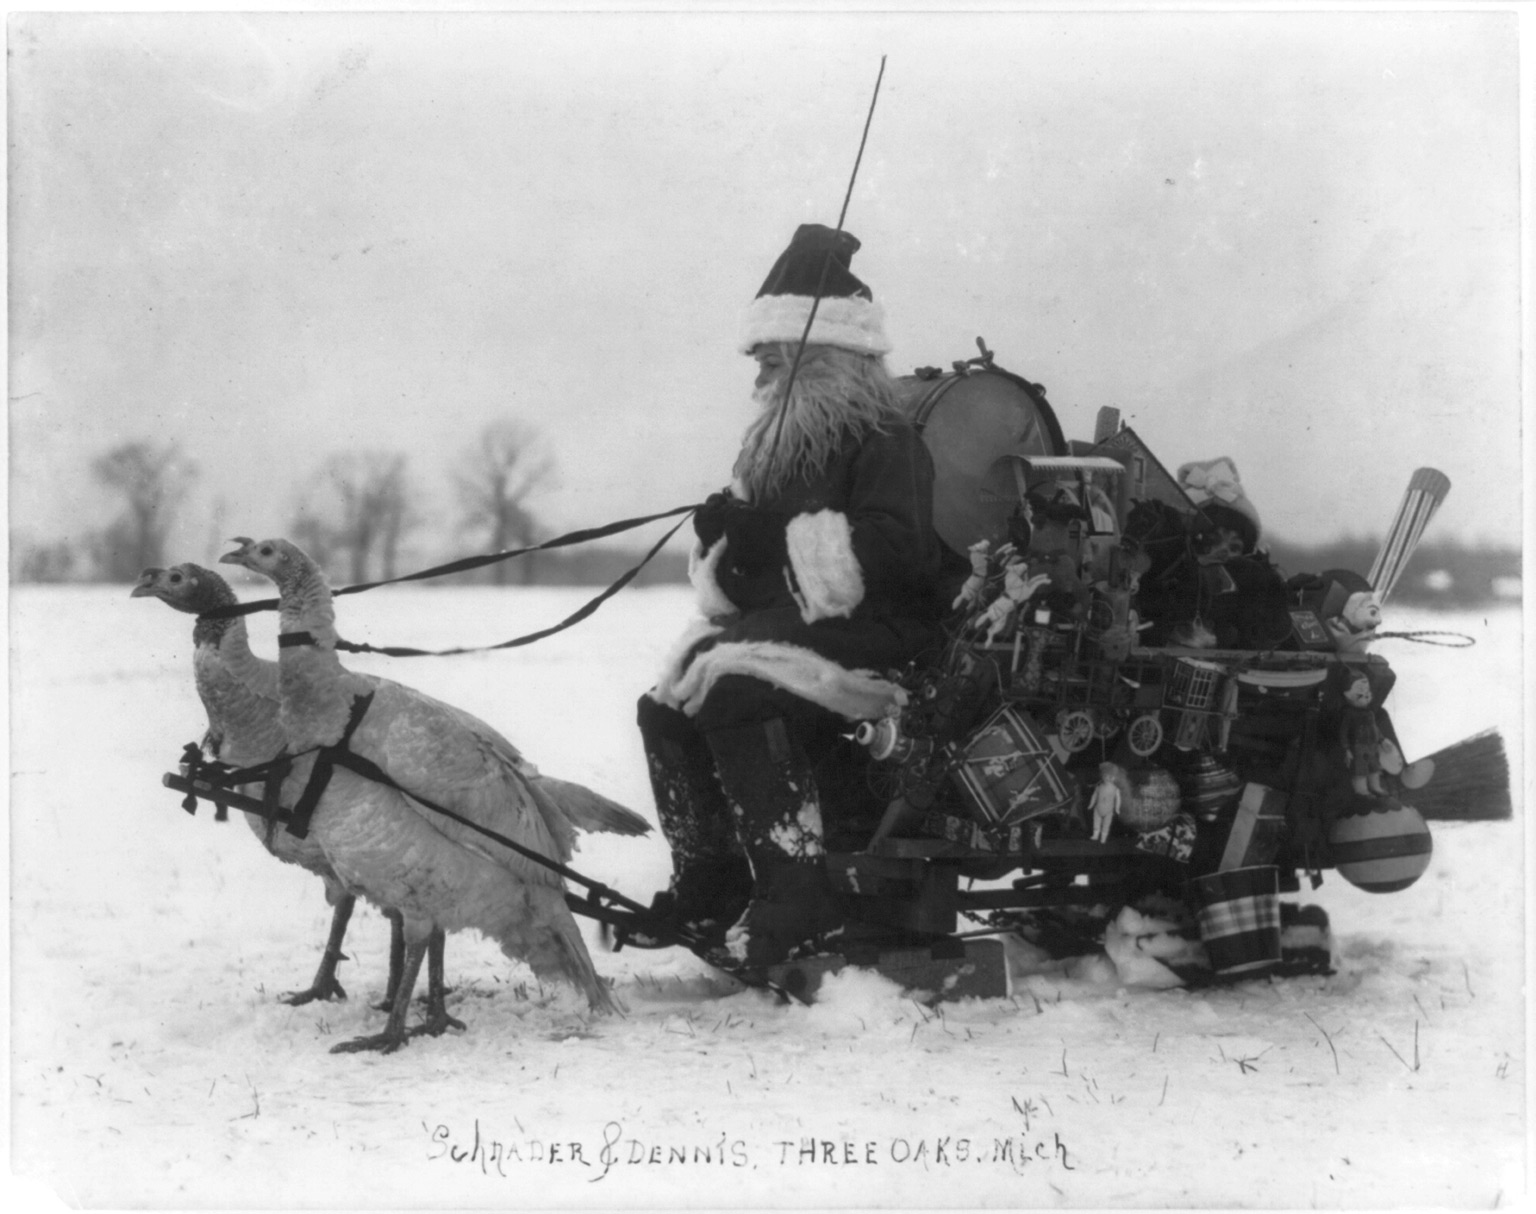 Santa Claus with Christmas toys on a sled drawn by white turkeys. 1909.